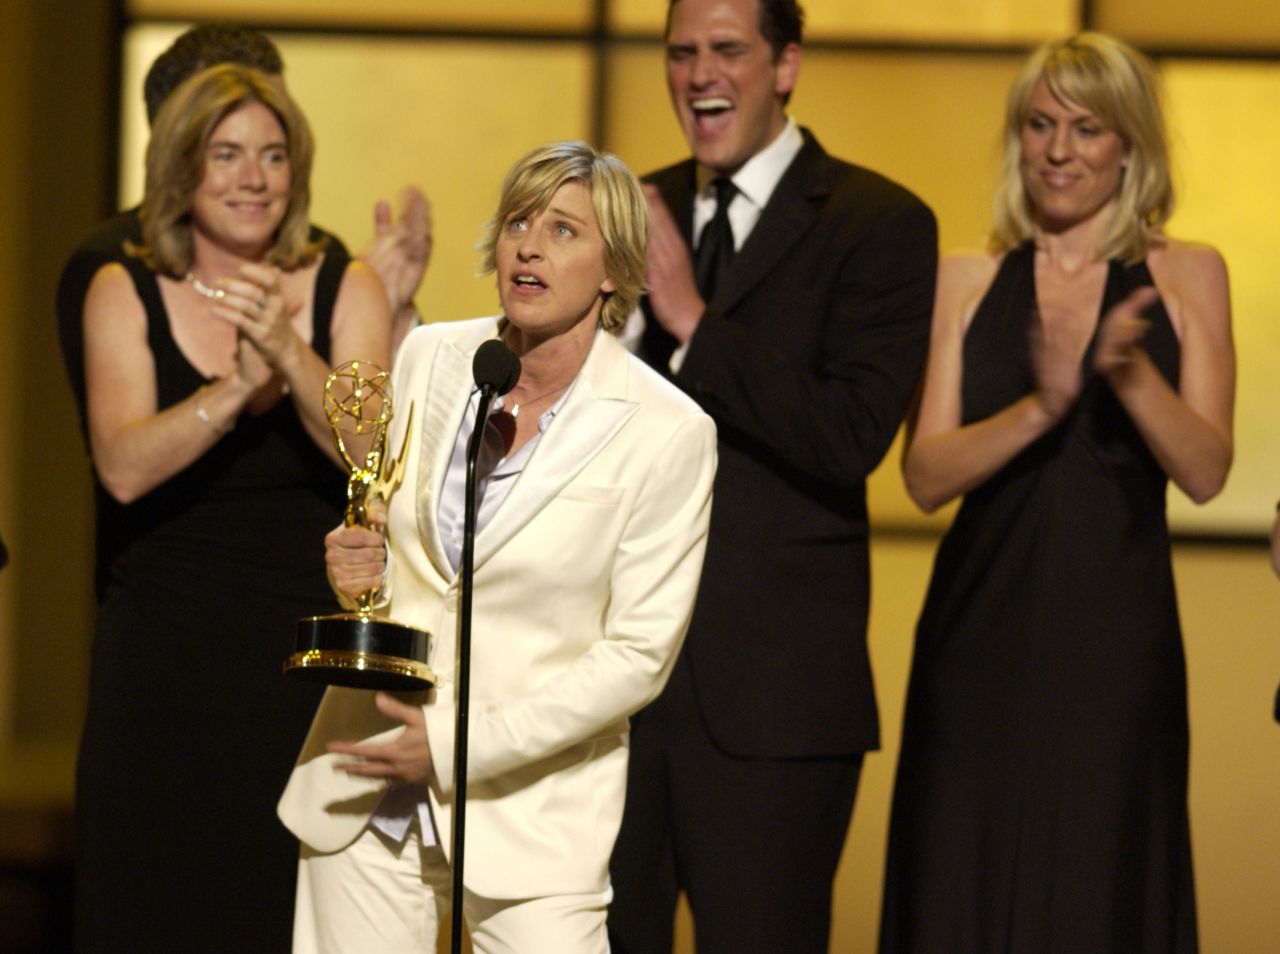 DeGeneres accepts an Emmy Award on behalf of her show in May 2004. "The Ellen DeGeneres Show" was recently extended to 2022.